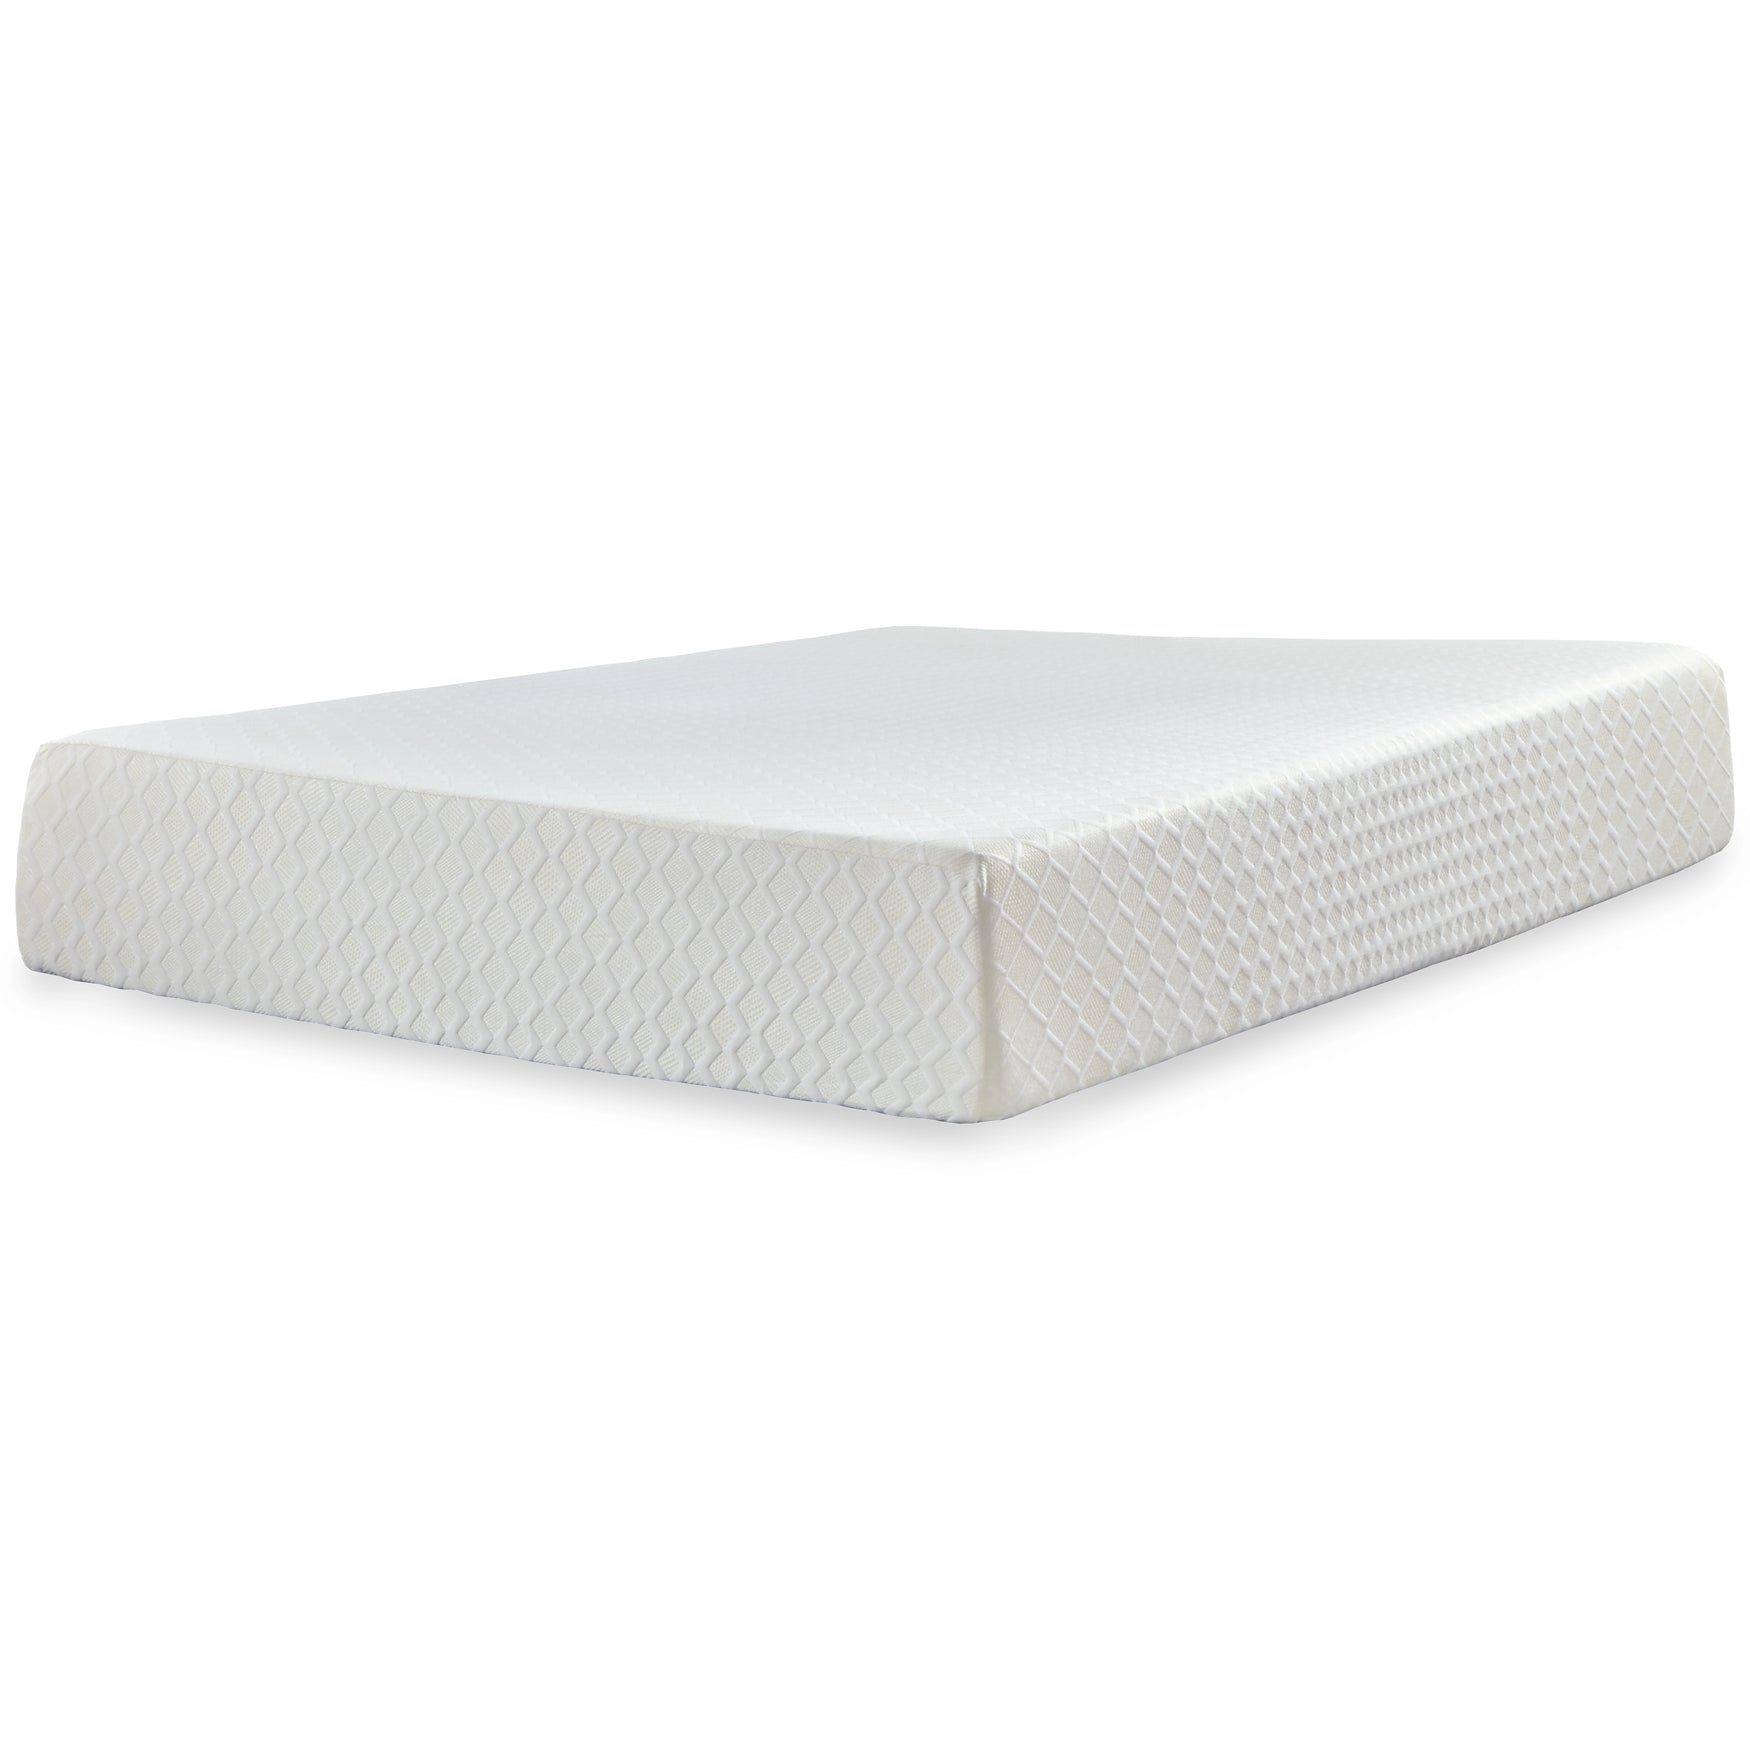 Chime 12 Inch Memory Foam Mattress with Adjustable Base JB's Furniture  Home Furniture, Home Decor, Furniture Store